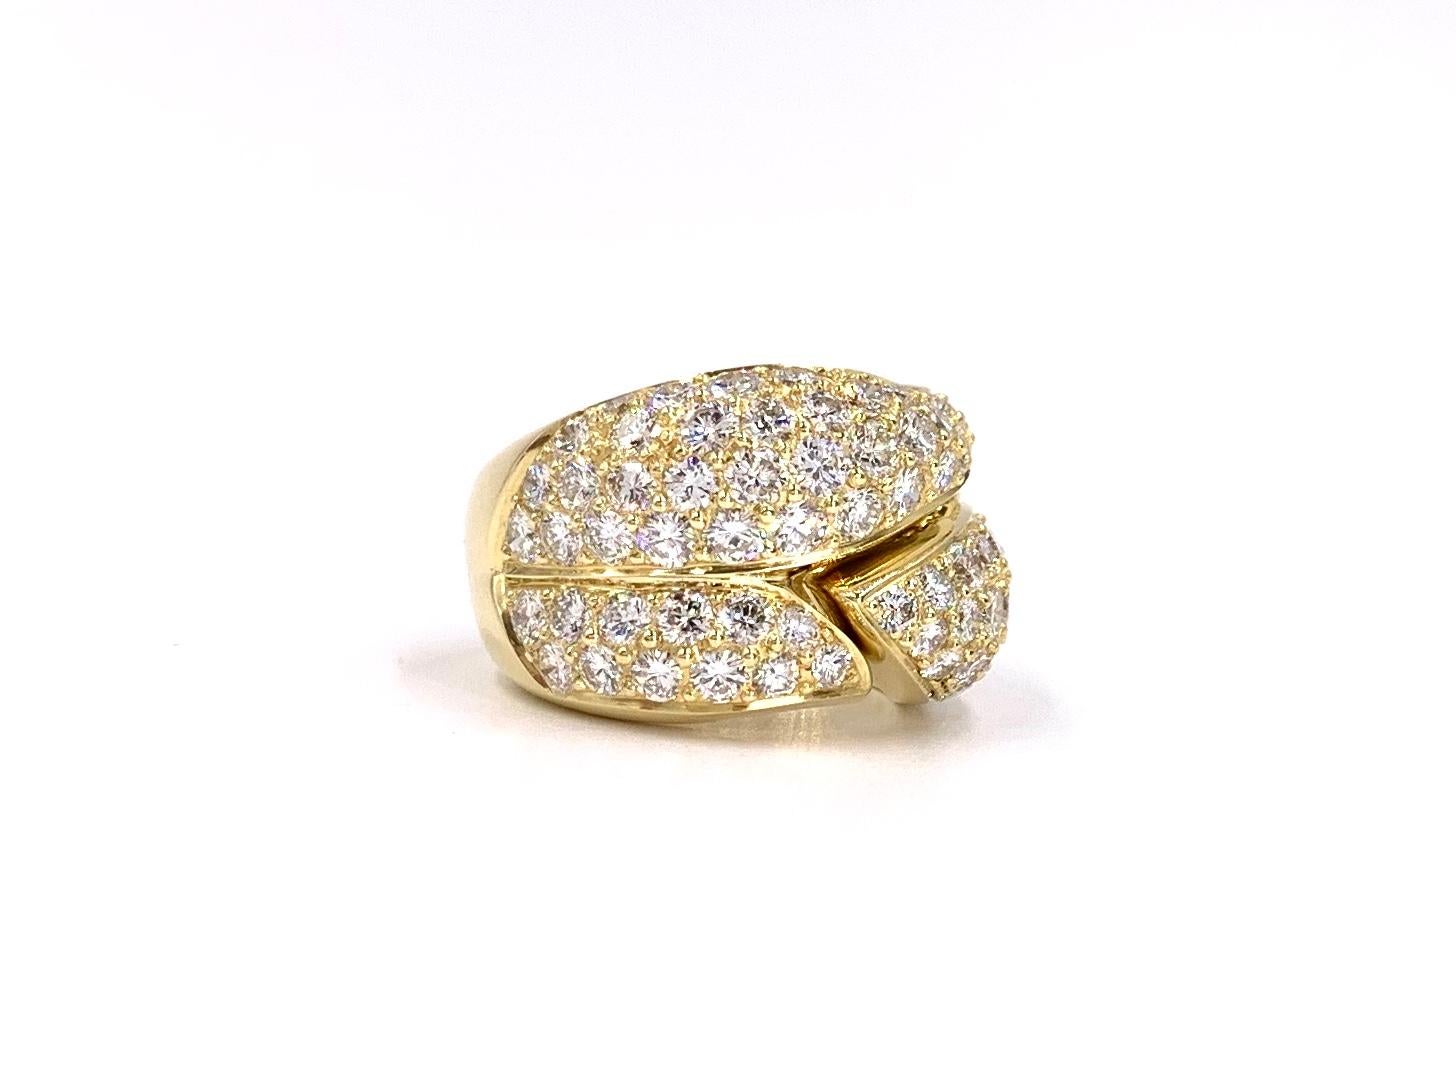 A unique 18k yellow gold wide curvy pavé diamond ring with a hinge feature allowing the ring to be taken on and off over fingers with knuckle issues and will fit a range of finger sizes comfortably. Ring is adorned with 84 high-quality round